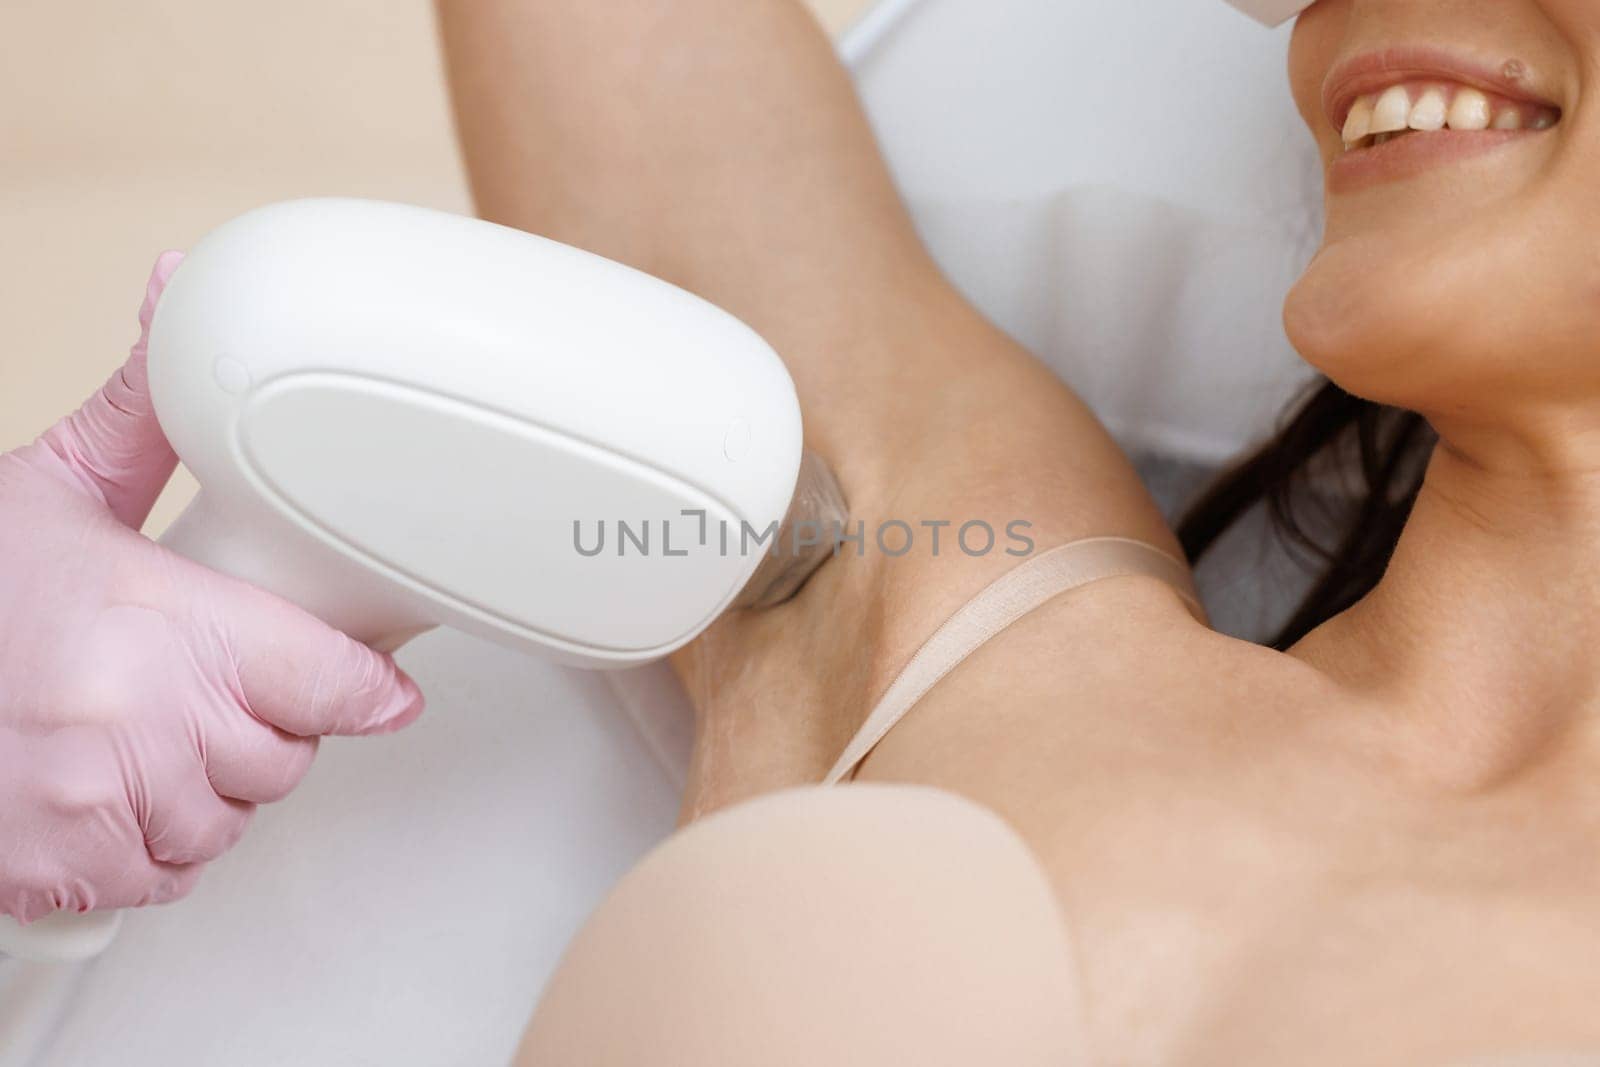 Laser hair removal procedure in the armpit area. Application of sugar paste for the sugaring procedure. Skin care, cosmetic procedures by uflypro